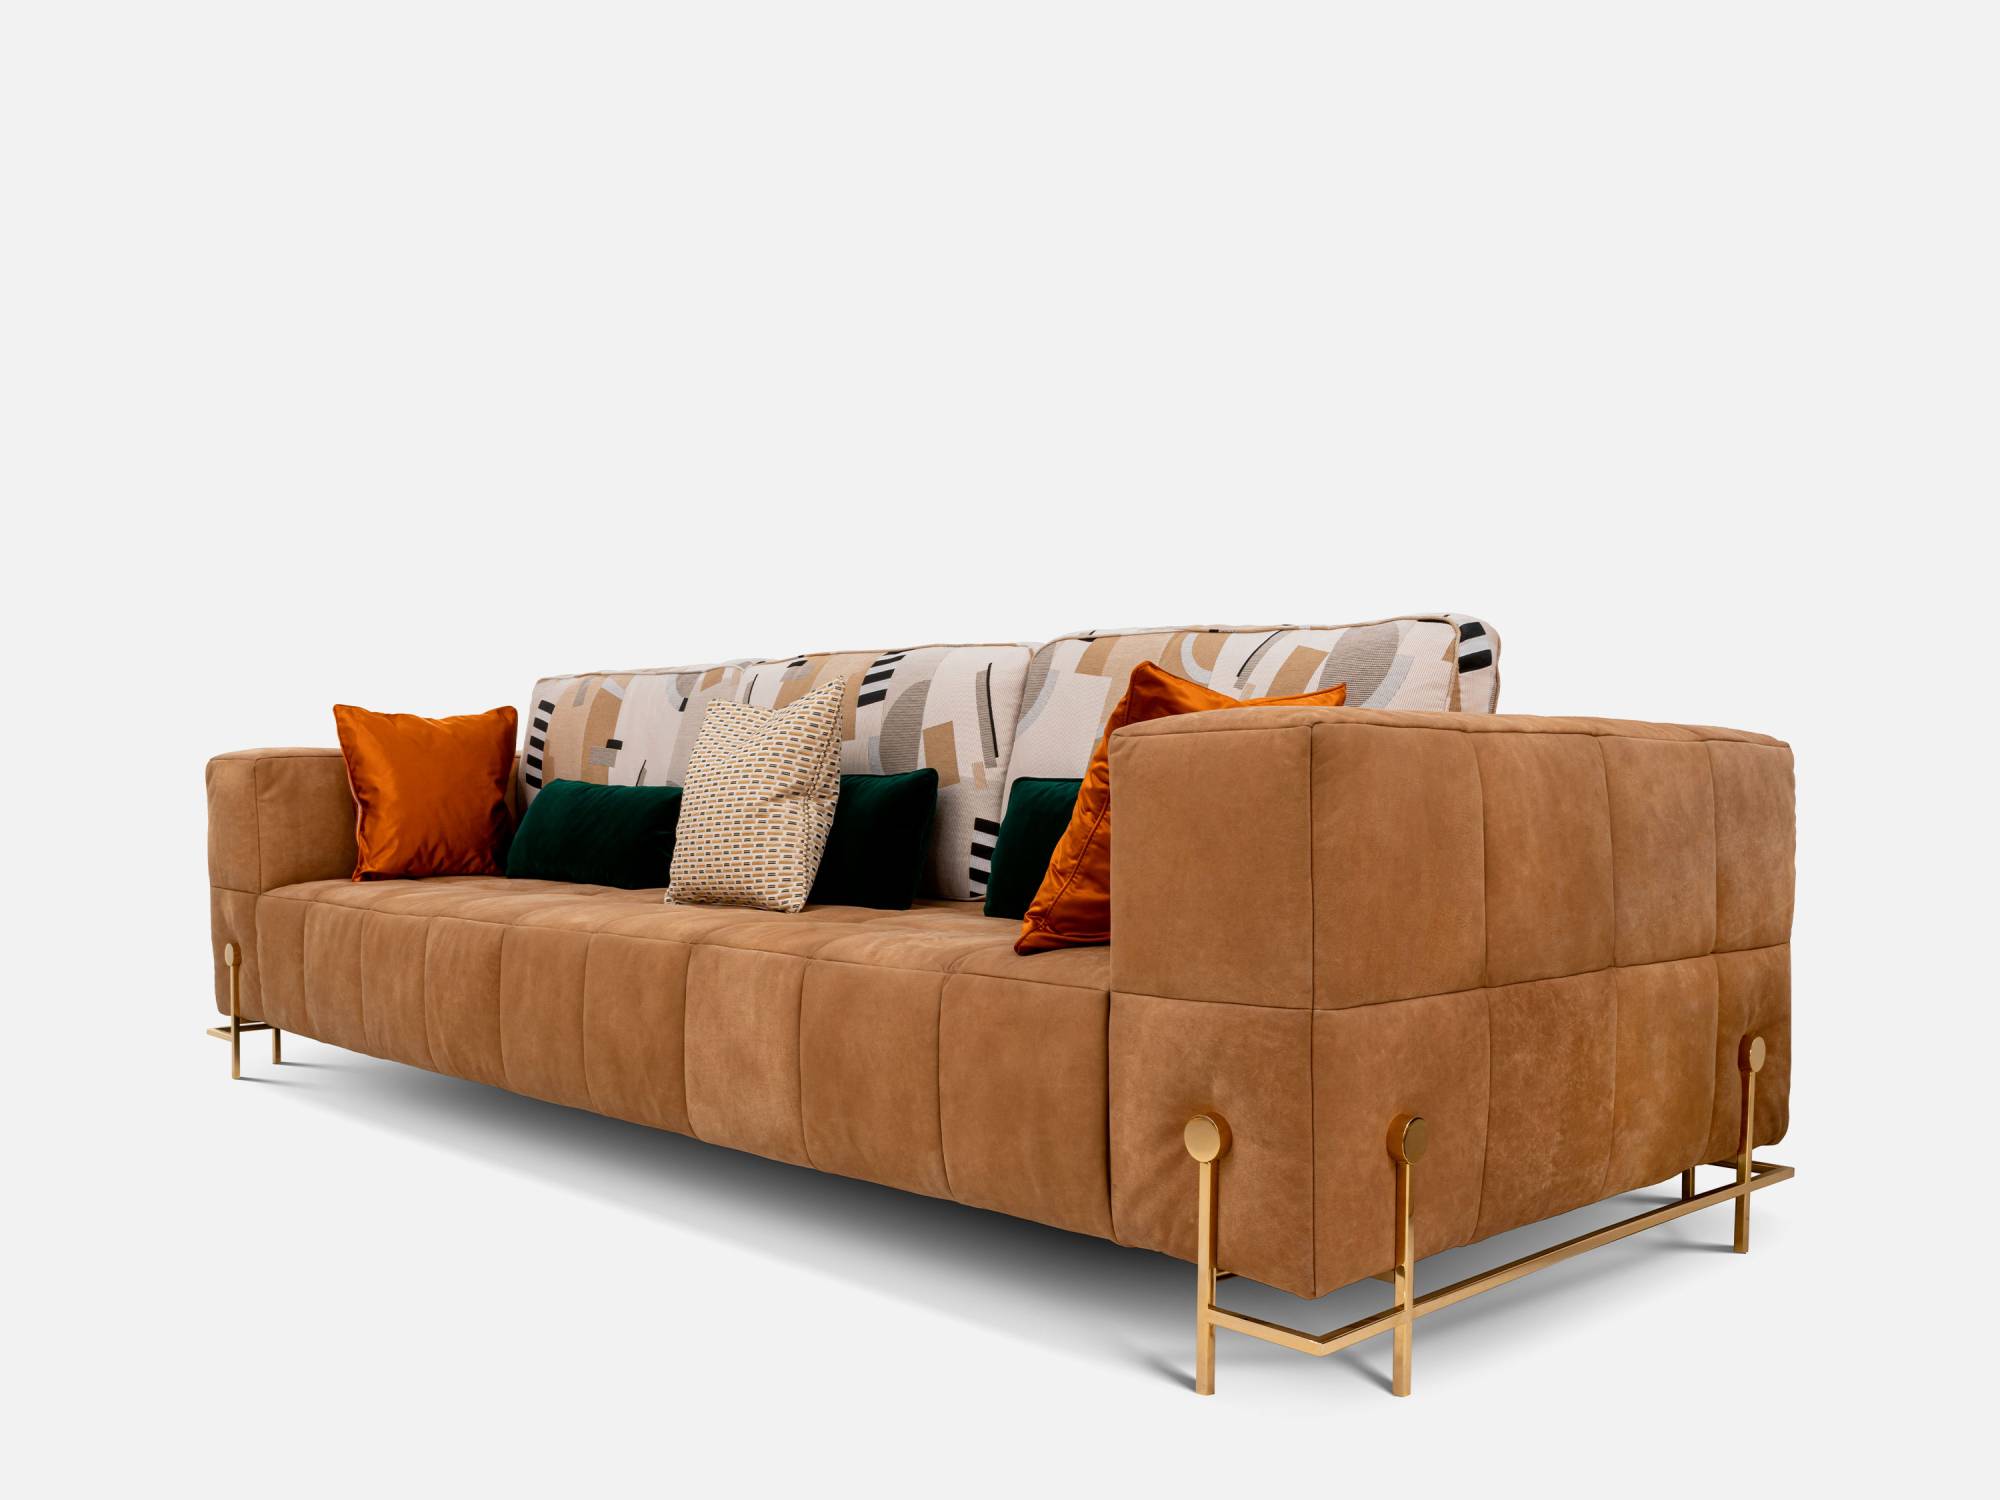 ART. 2314 – The elegance of luxury classic Sofas made in Italy by C.G. Capelletti.